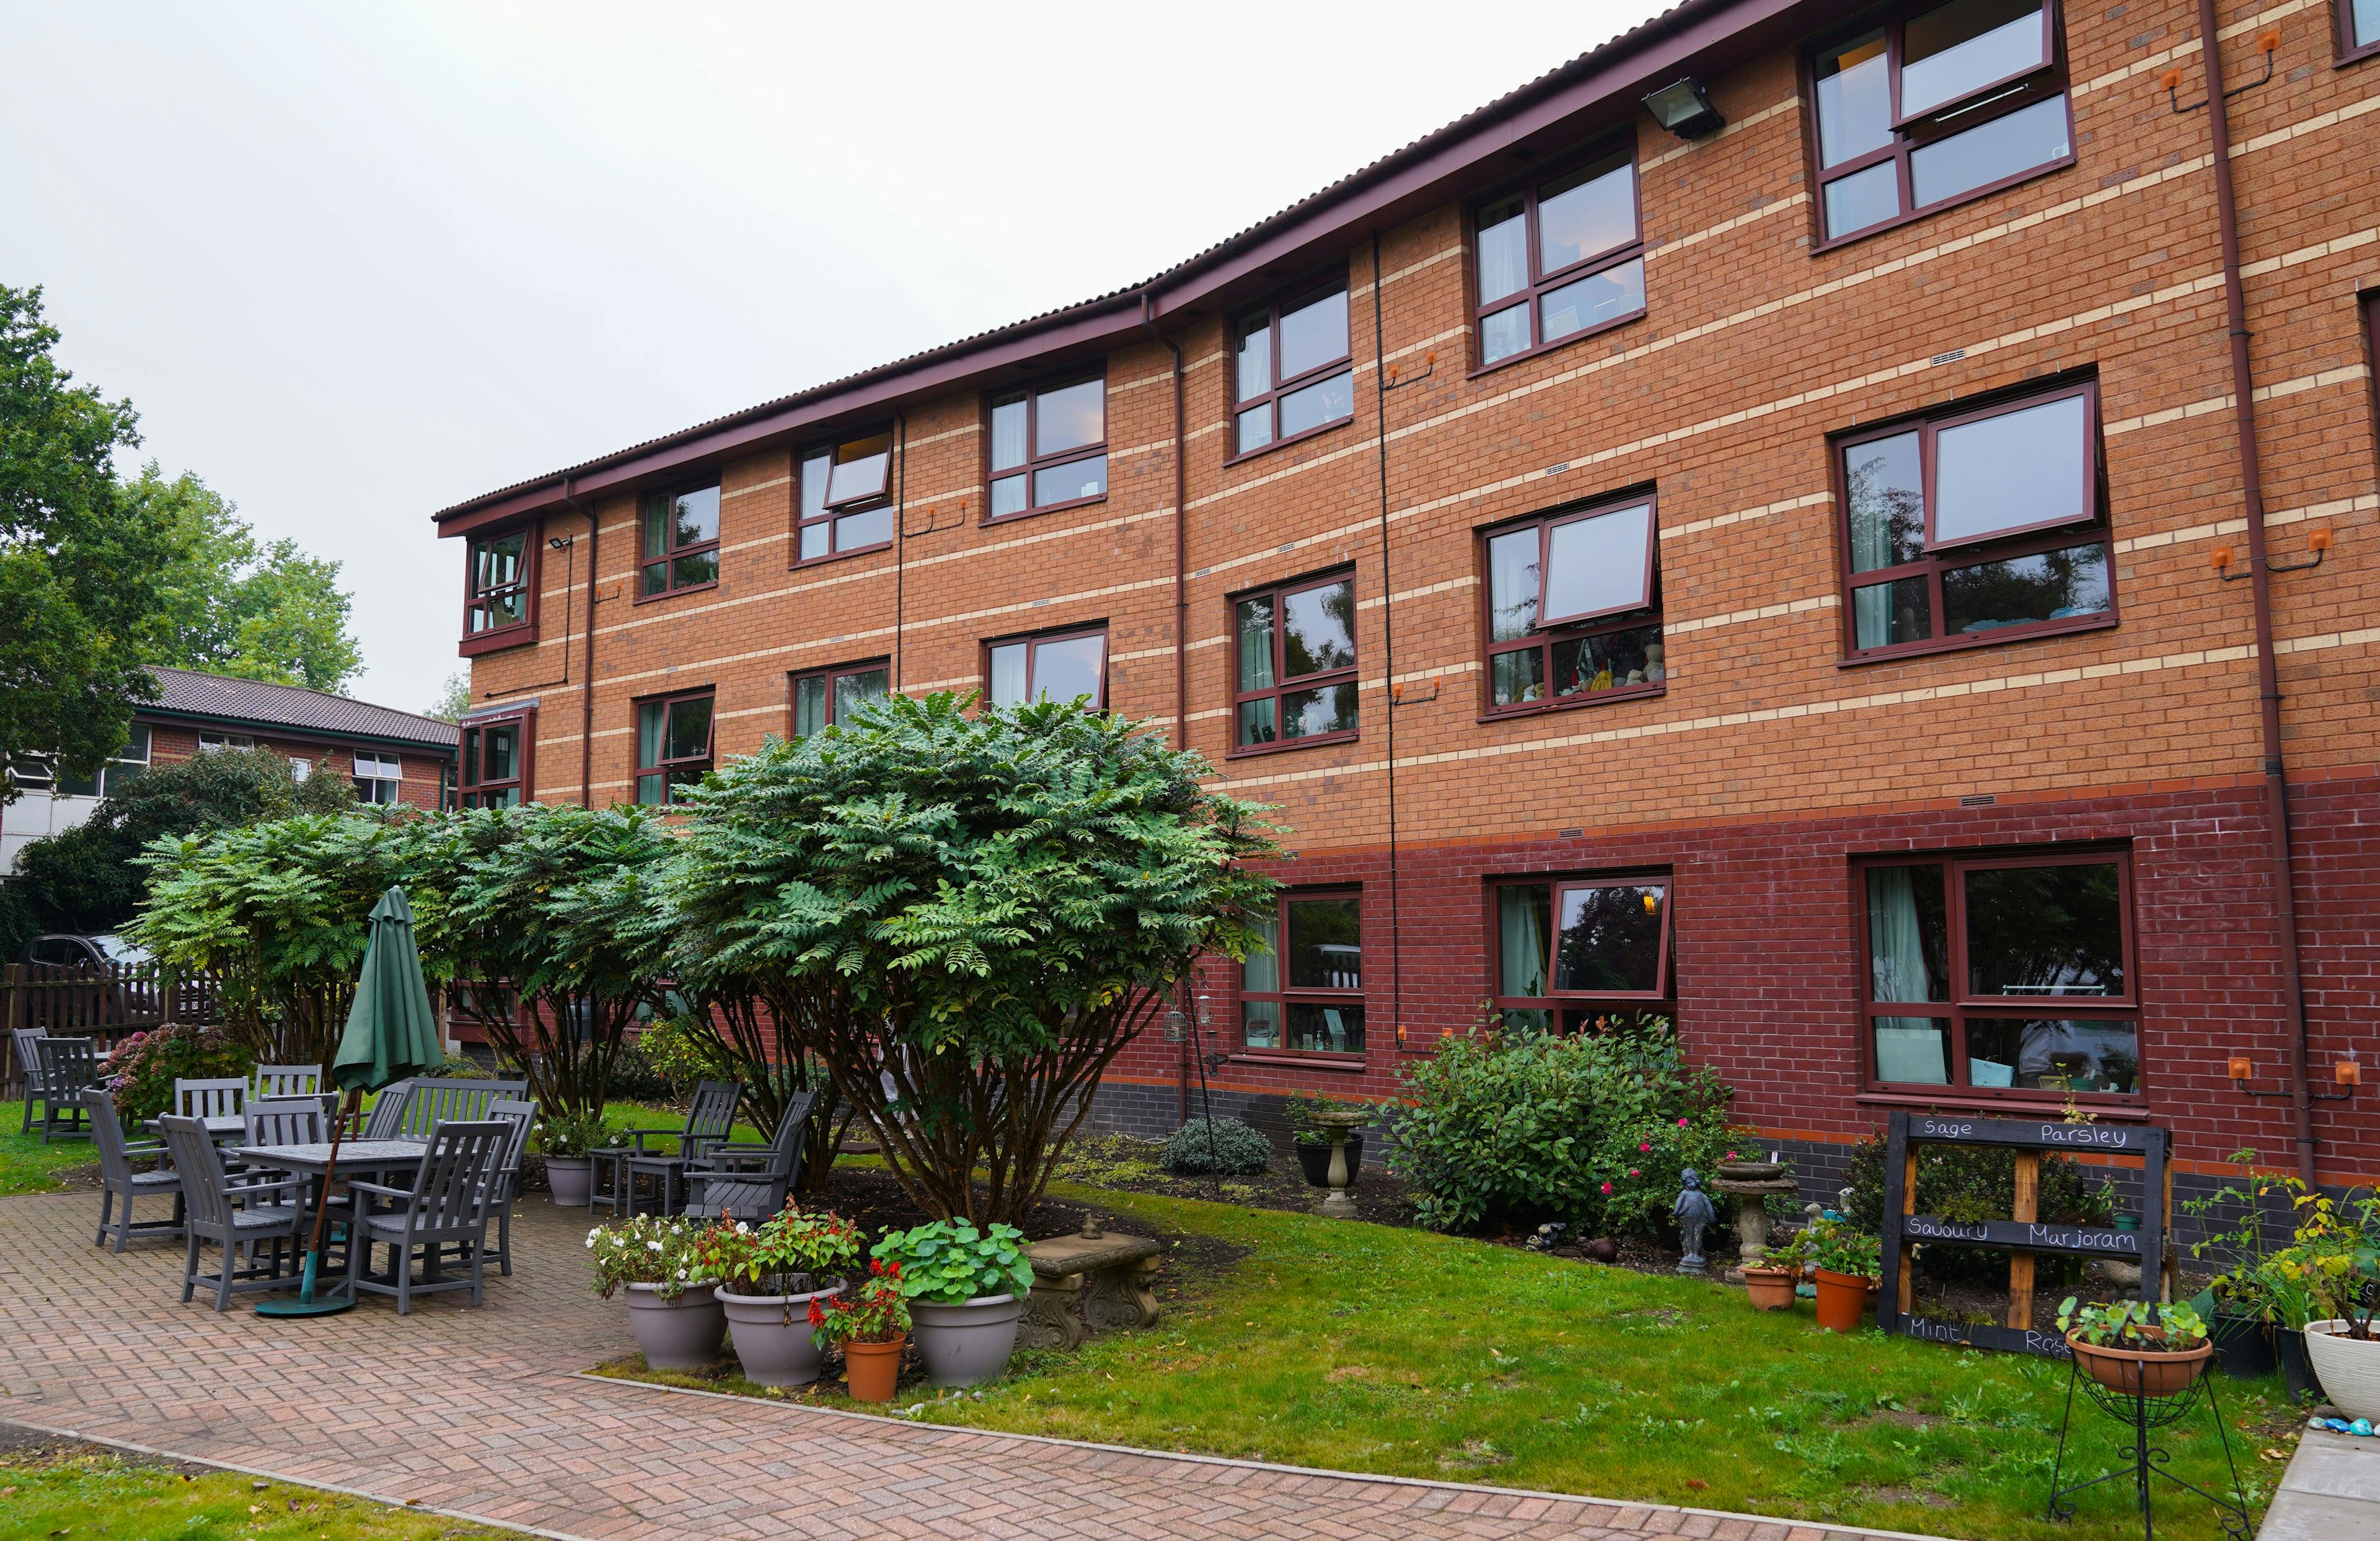 Exterior of Hastings care home in Malvern, West Midlands